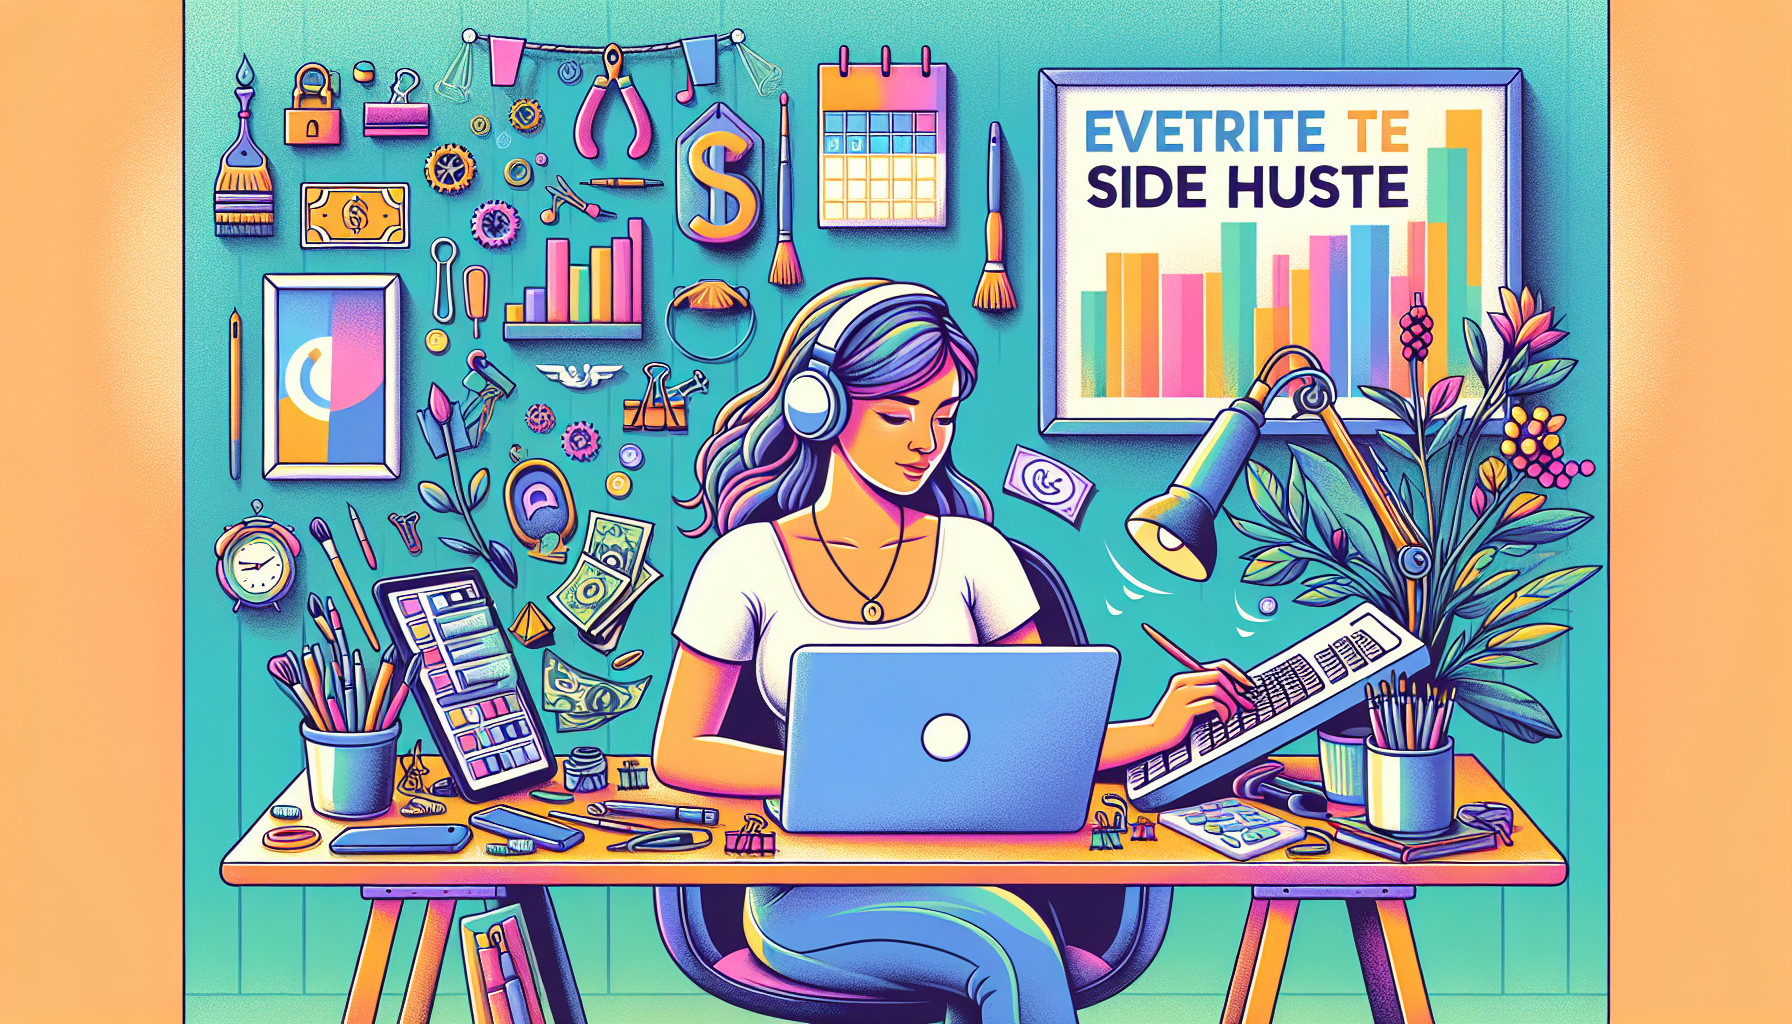 Illustration of a person working on a laptop at a cozy home desk with various tools and gadgets around them, symbolizing different types of side hustles like freelancing, online tutoring, and crafting. The scene includes a calendar on the wall, money symbols, and motivational quotes to convey the potential and motivation behind maximizing earnings with a side hustle.